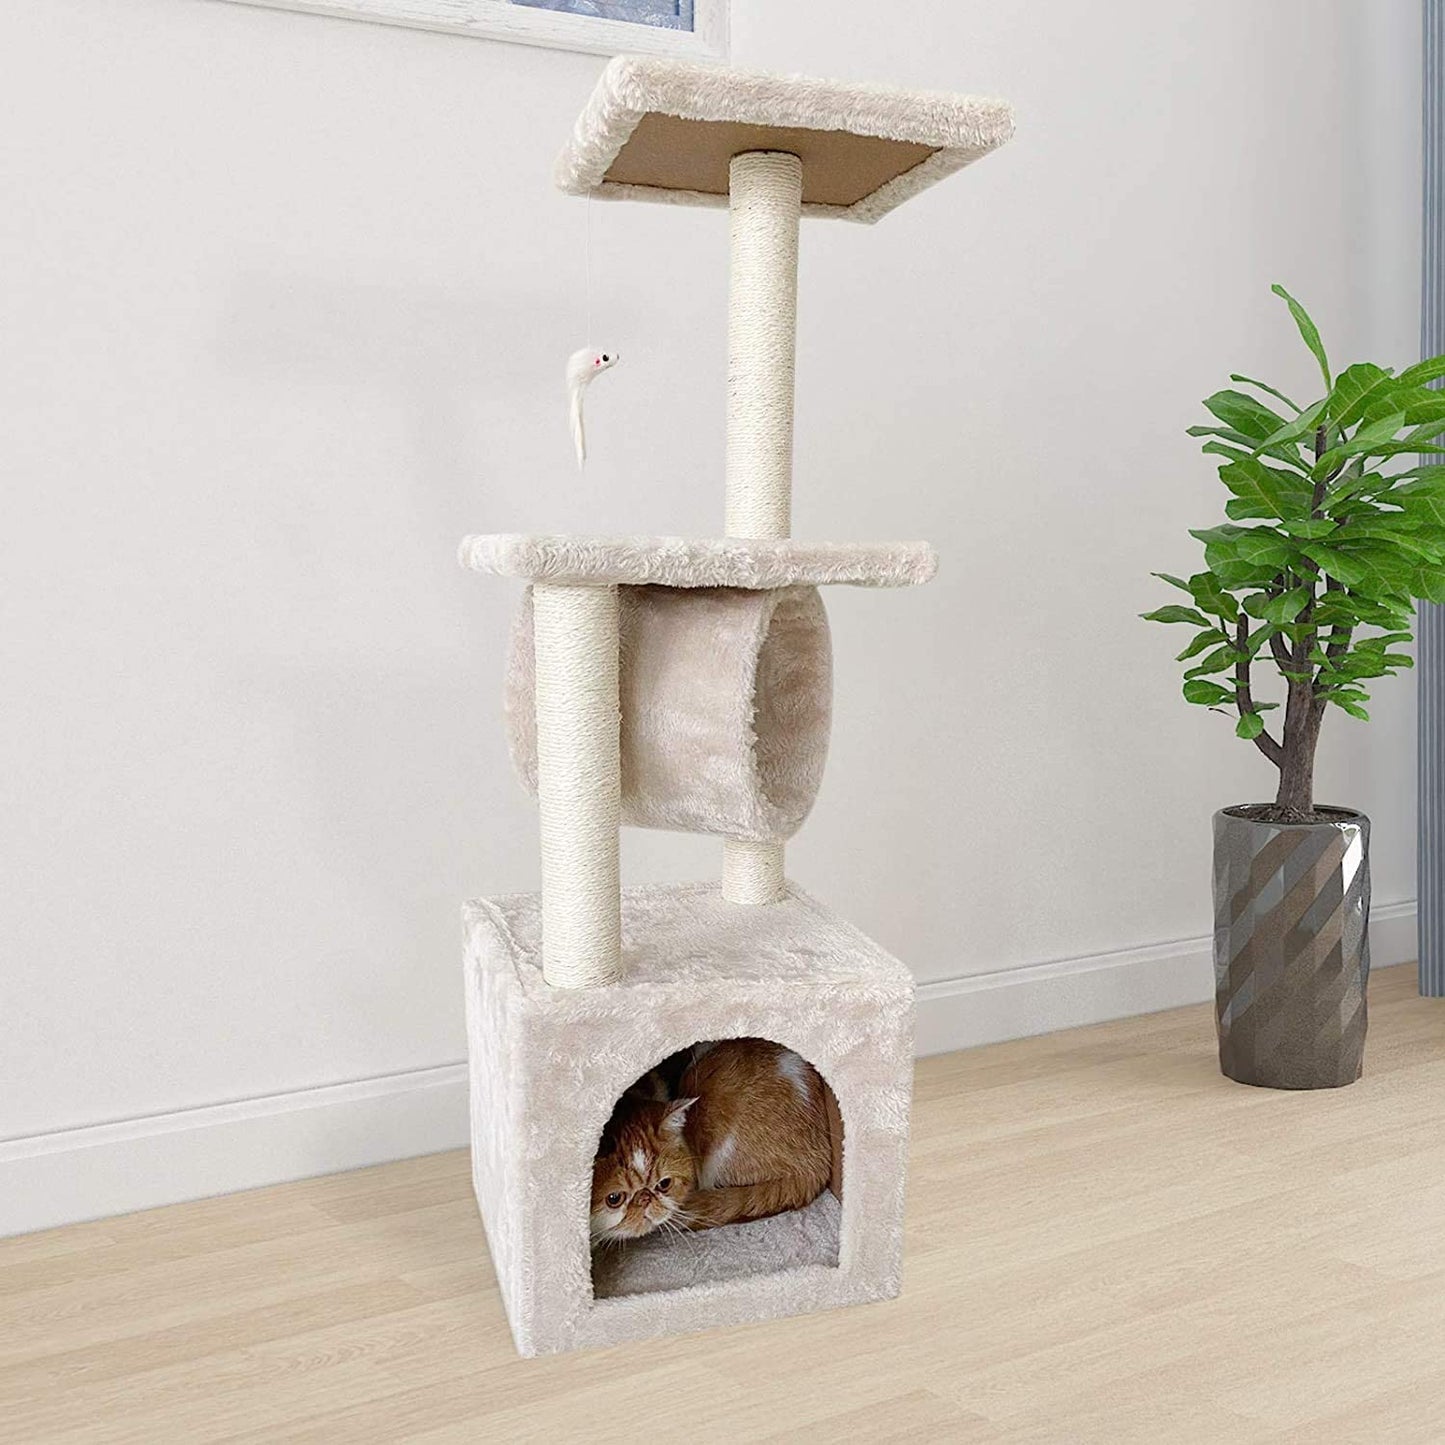 Confote 35.4-In Cat Activity Tree Climb Tower Play House Condo Furniture for Small and Medium Cat, Beige White